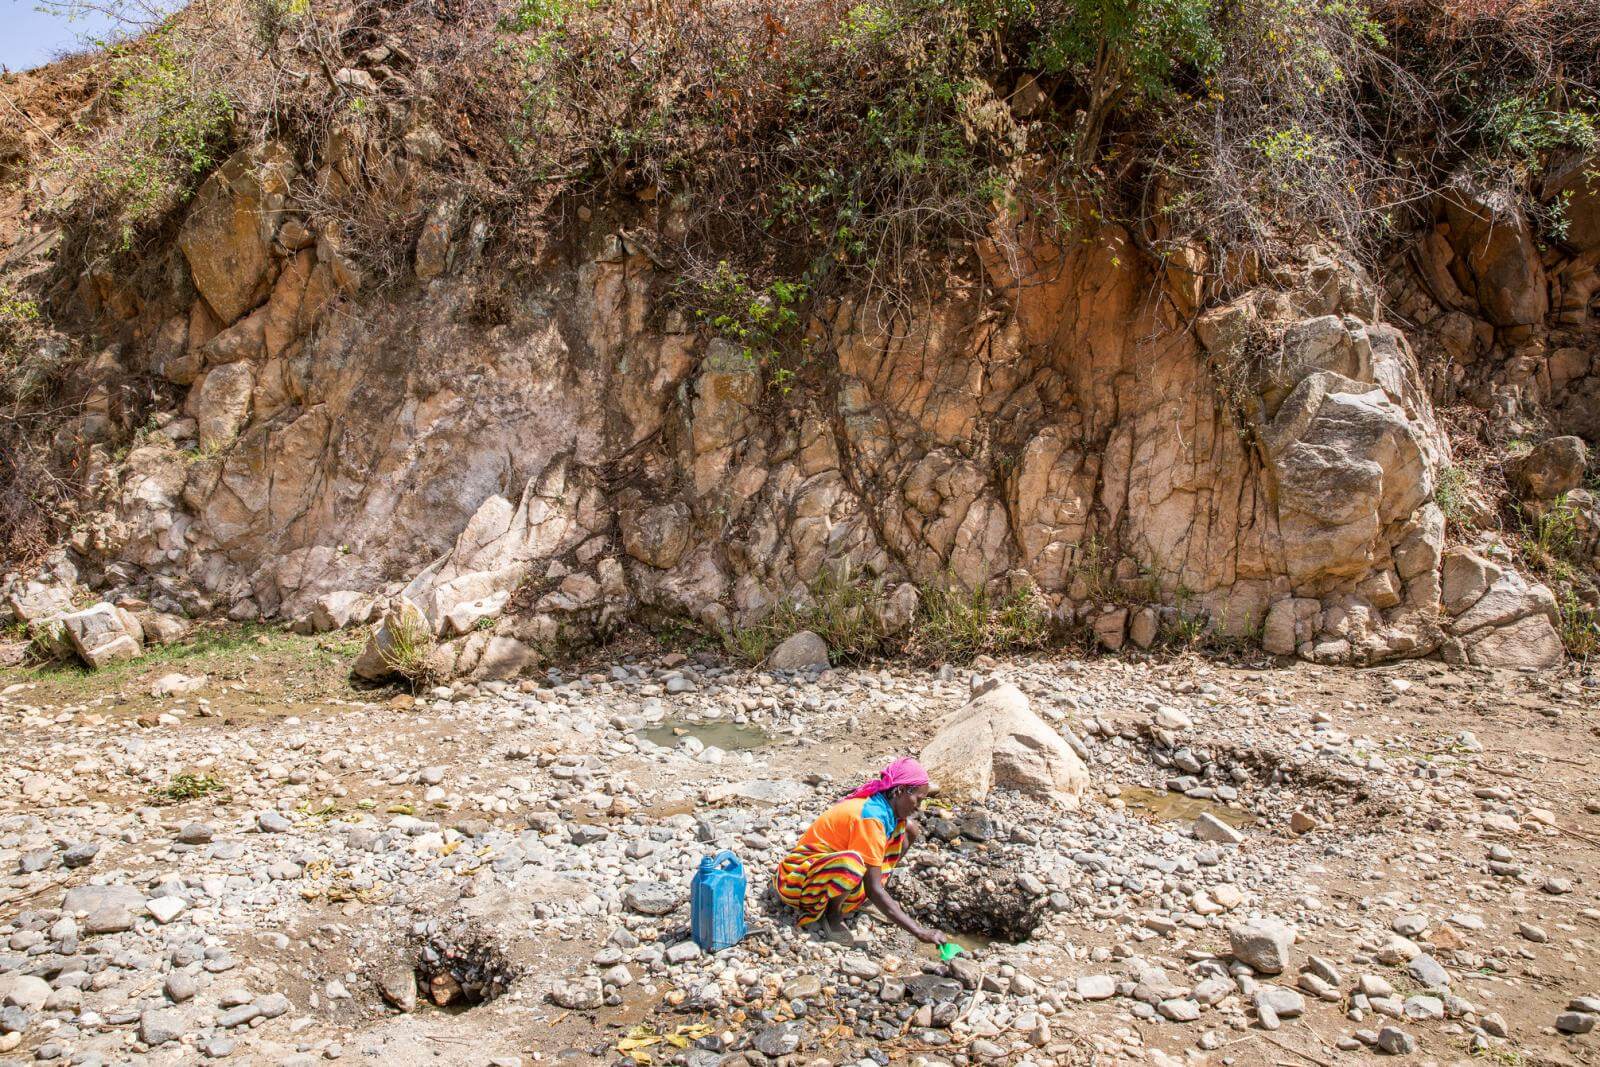 A woman gathering water at a rocky area in ethiopia